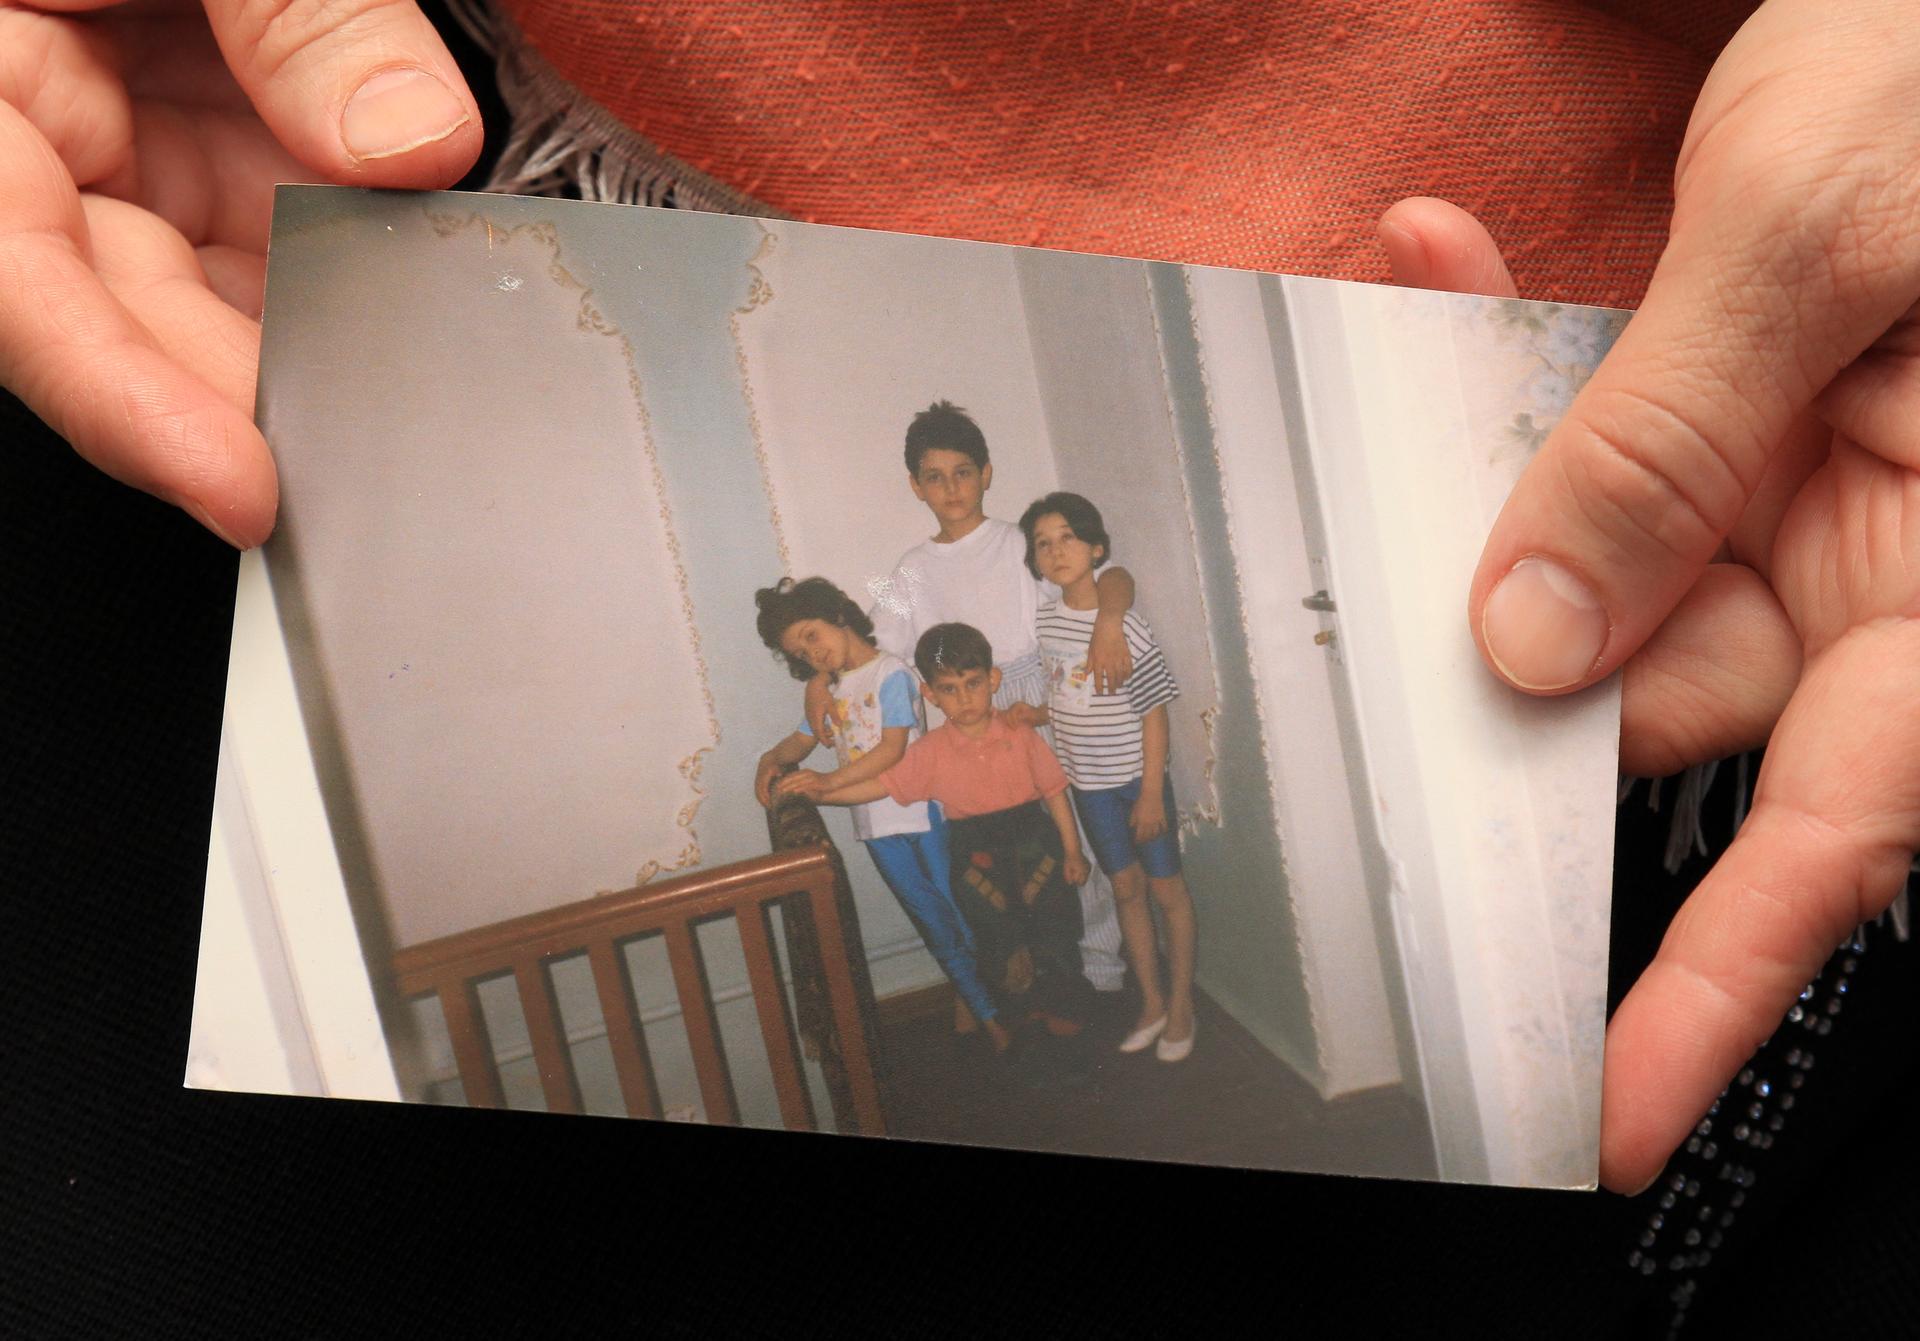 Patimat Suleimanova, aunt of Boston bombing suspects Dzhokhar and Tamerlan Tsarnaev, holds a photo from the family archive at her house in Makhachkala.